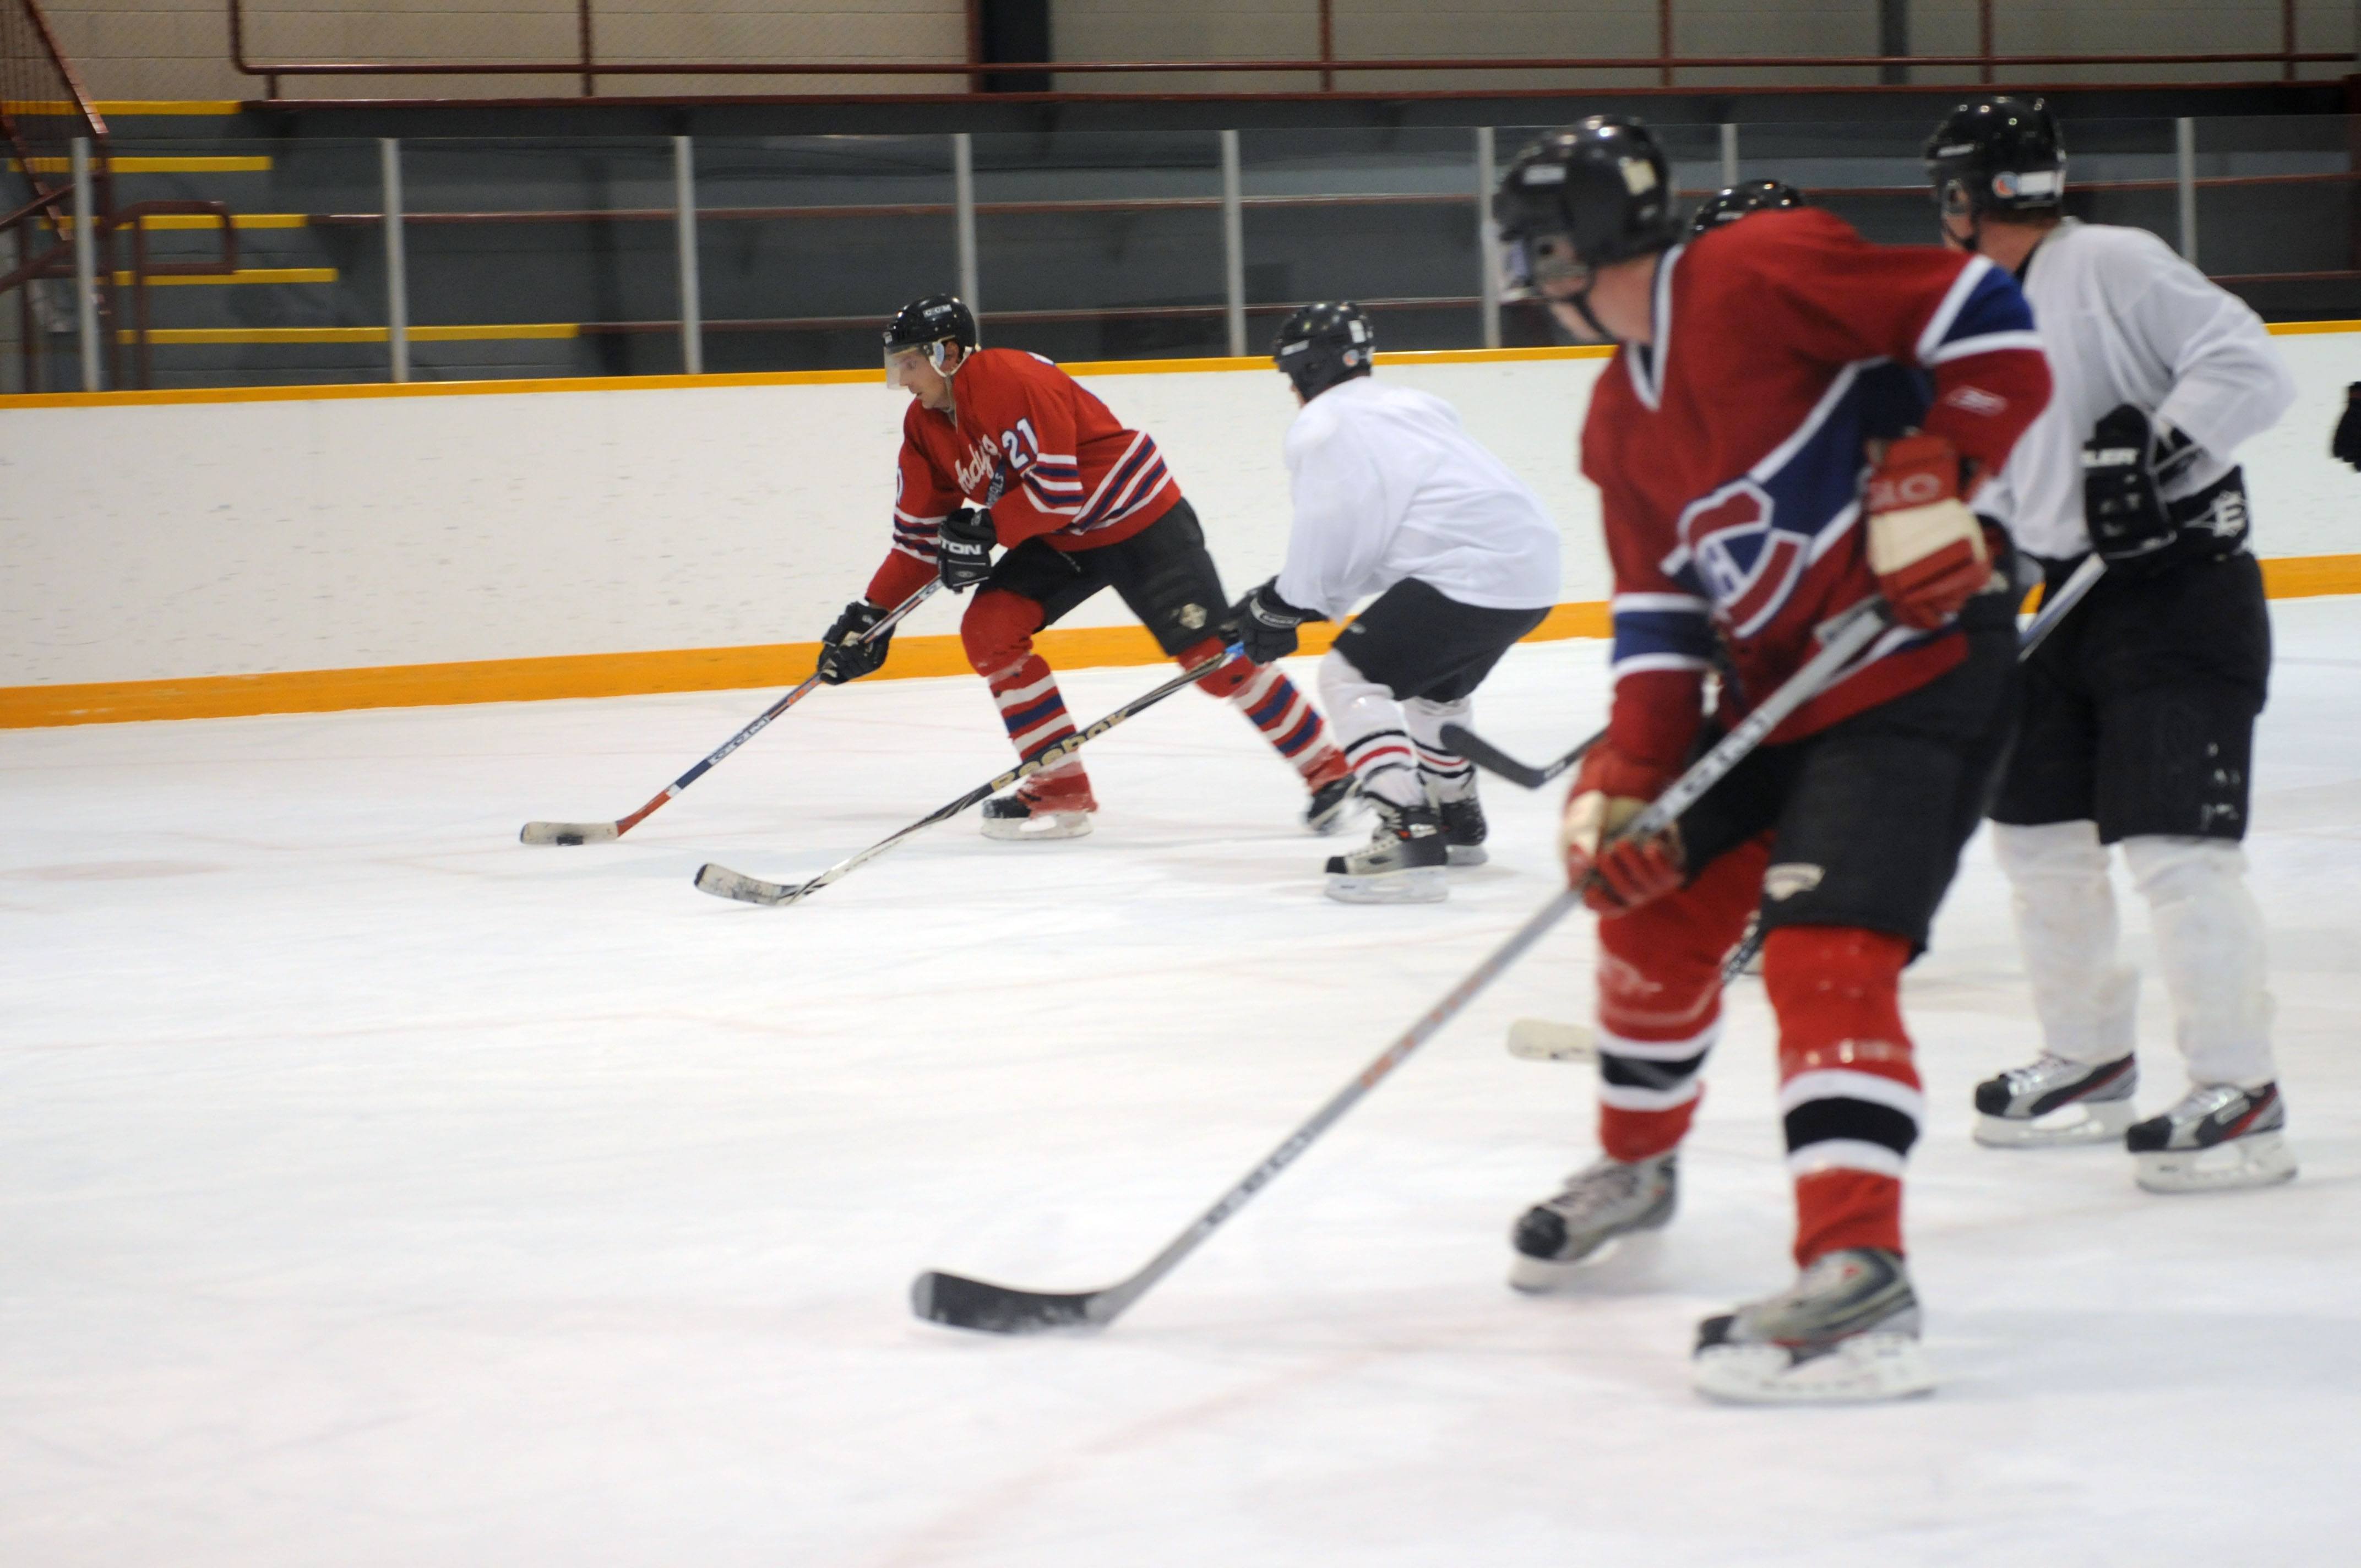 TOUGH BUNCH- Jeff Kuytnec takes the puck down the ice at the Dawe Centre recently during a drop-in hockey game.